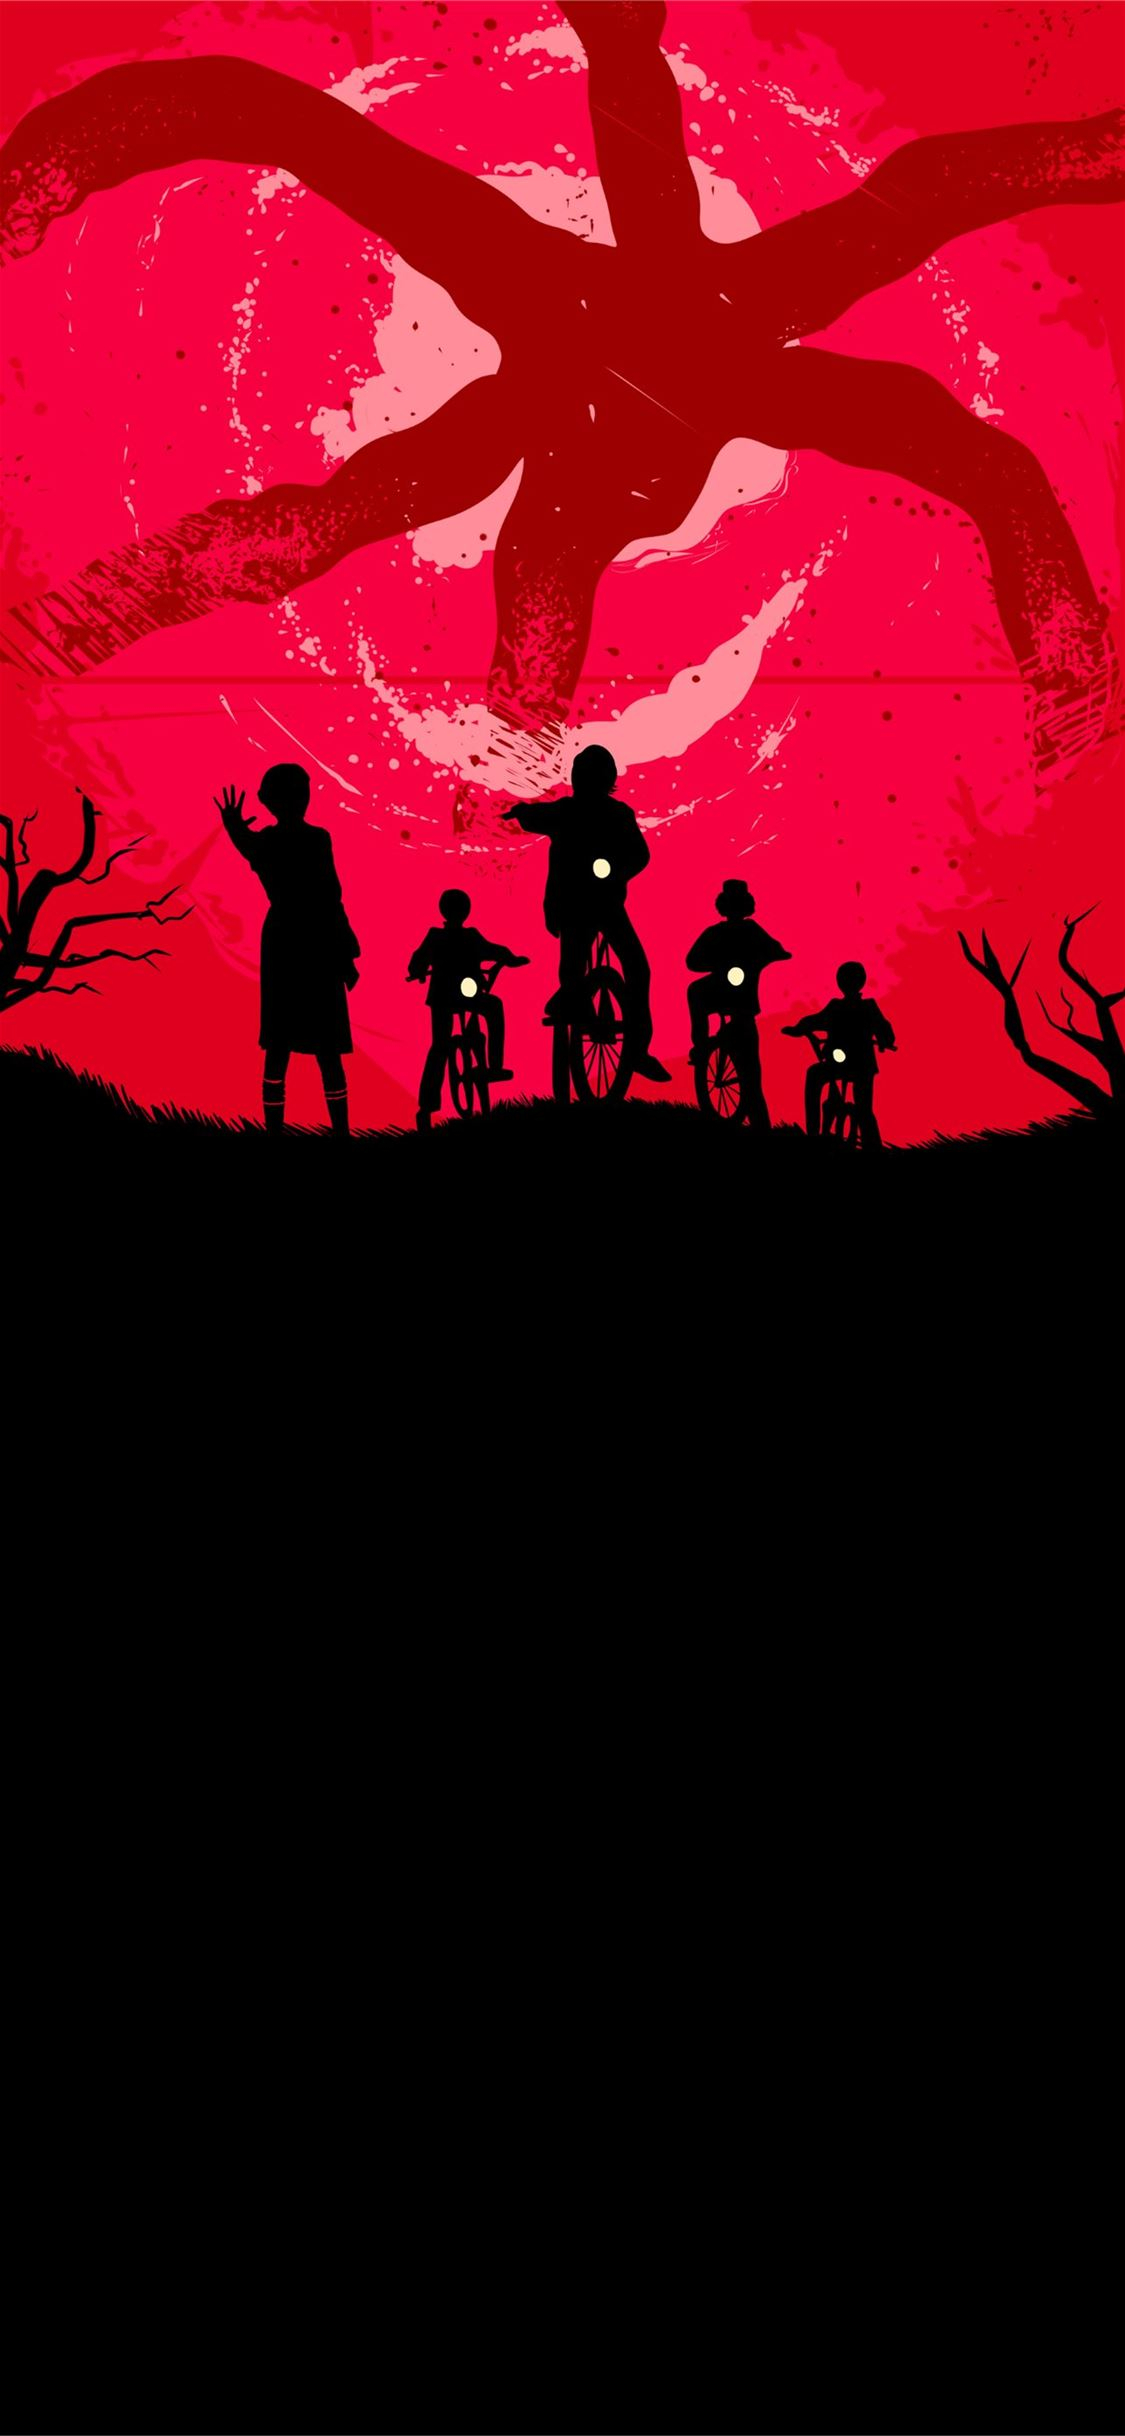 1125x2436 Stranger Things Amoledbackgrounds iPhone Wallpapers Free Download